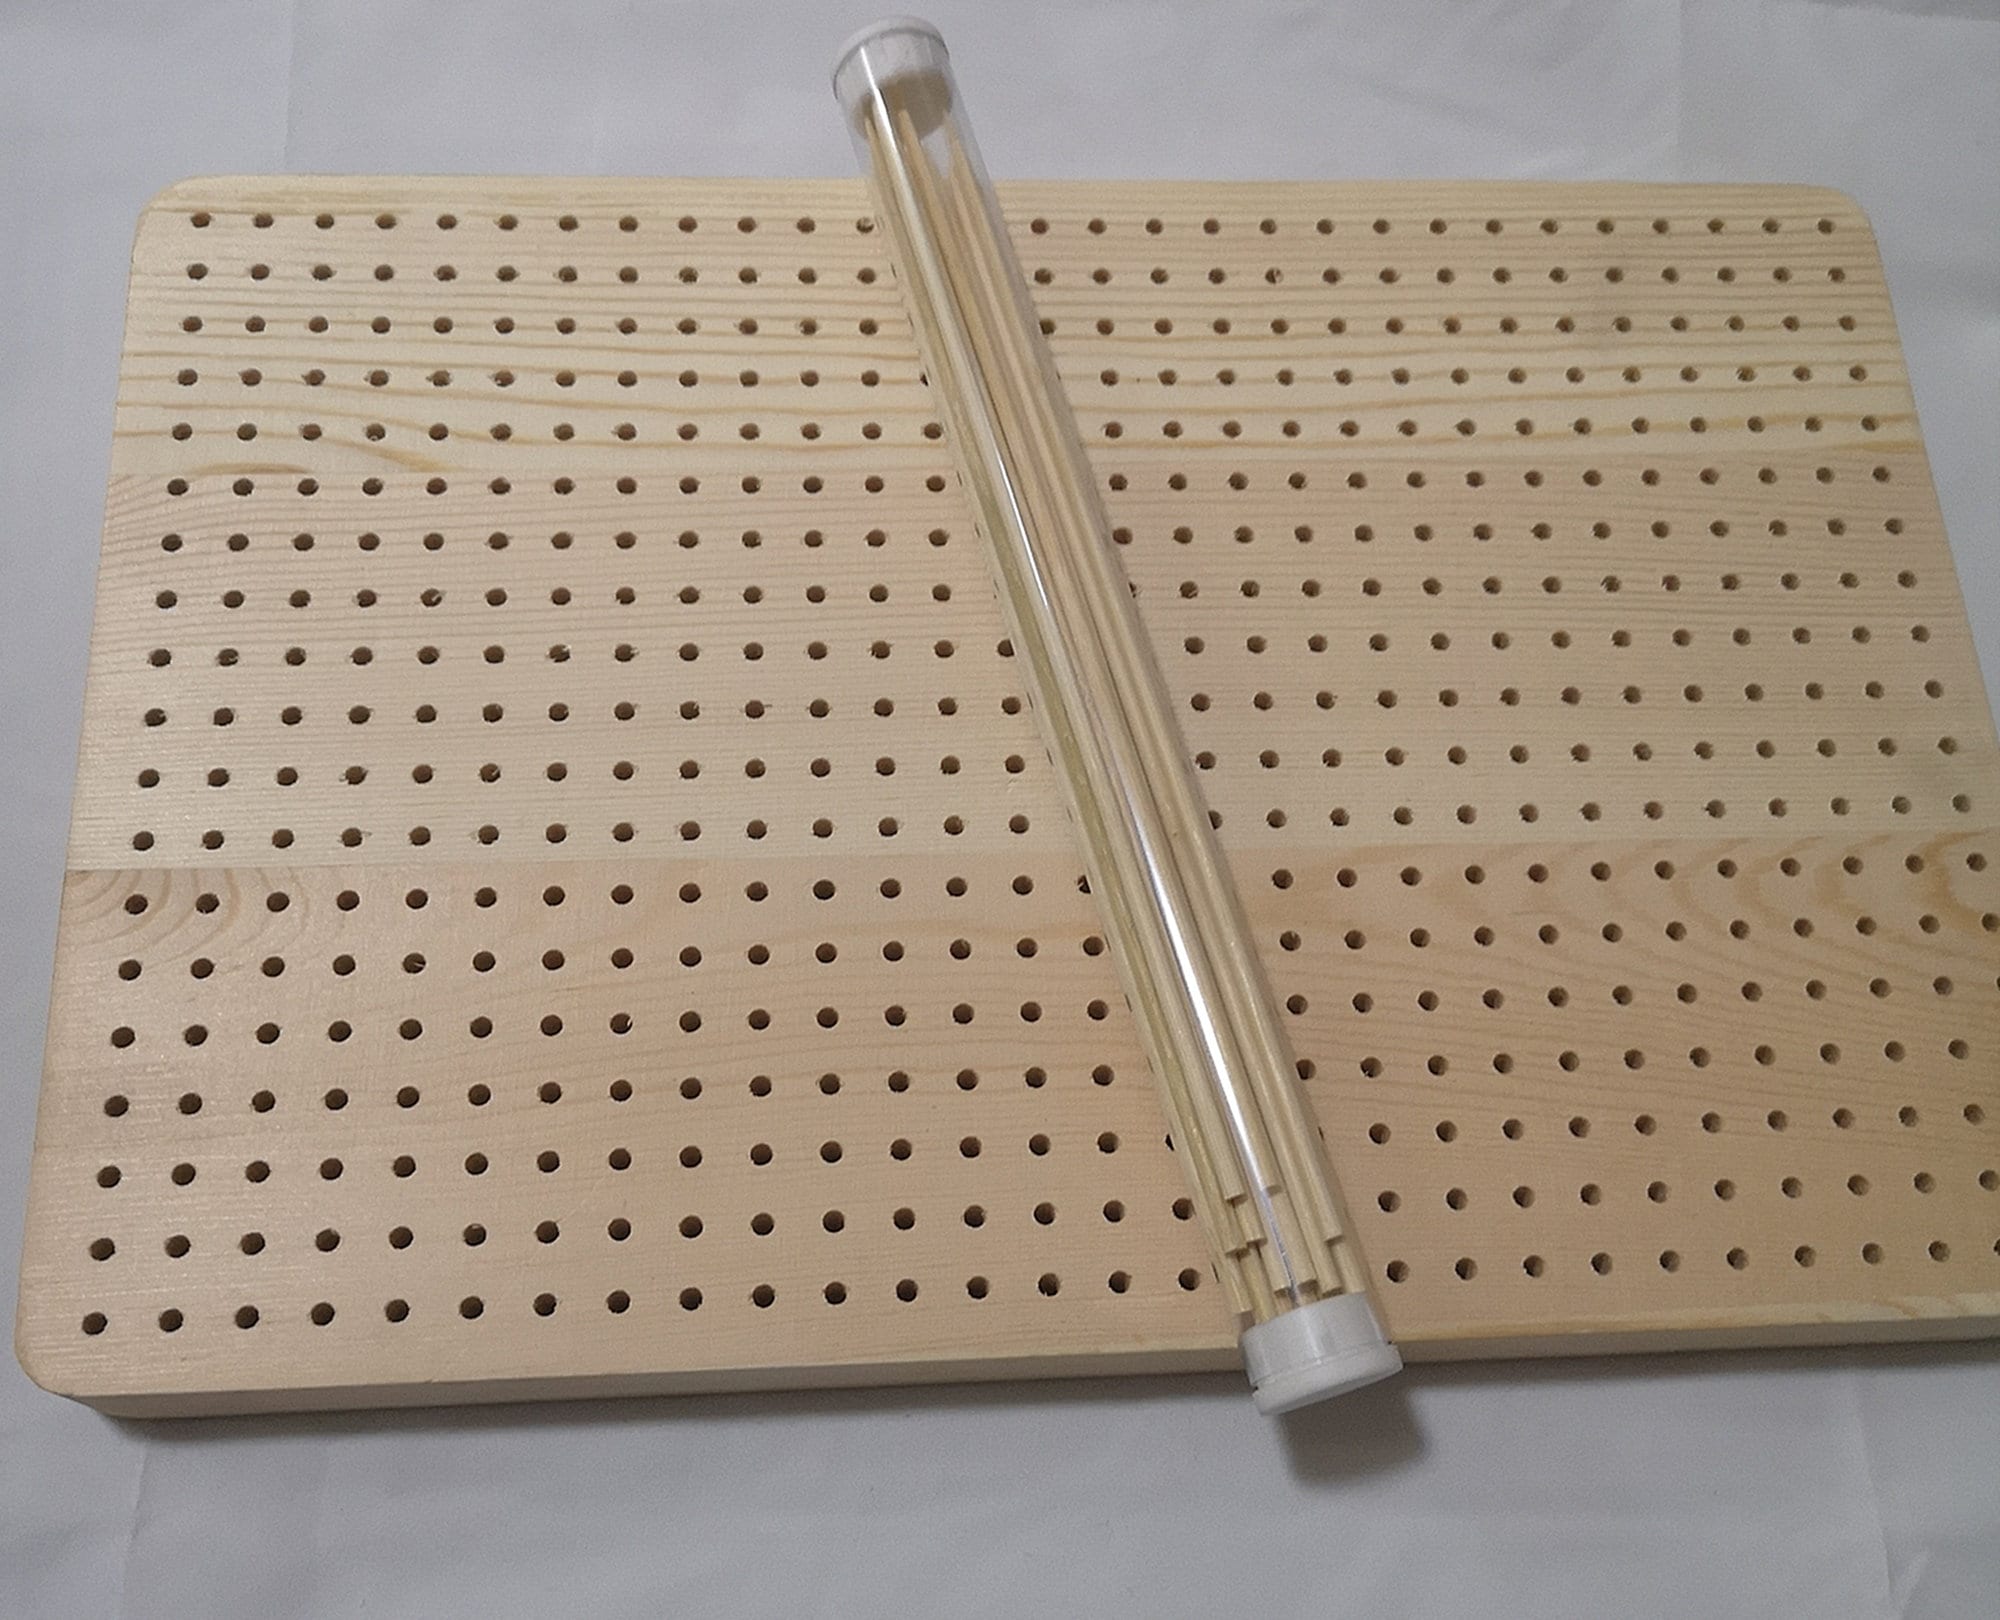  Crochet Blocking Board, 11.6 Inches Bamboo Blocking Board for  Knitting Crochet and Granny Squares, Handcrafted Knitting with 20 Pcs  Stainless Steel Pins and Crochet Kit